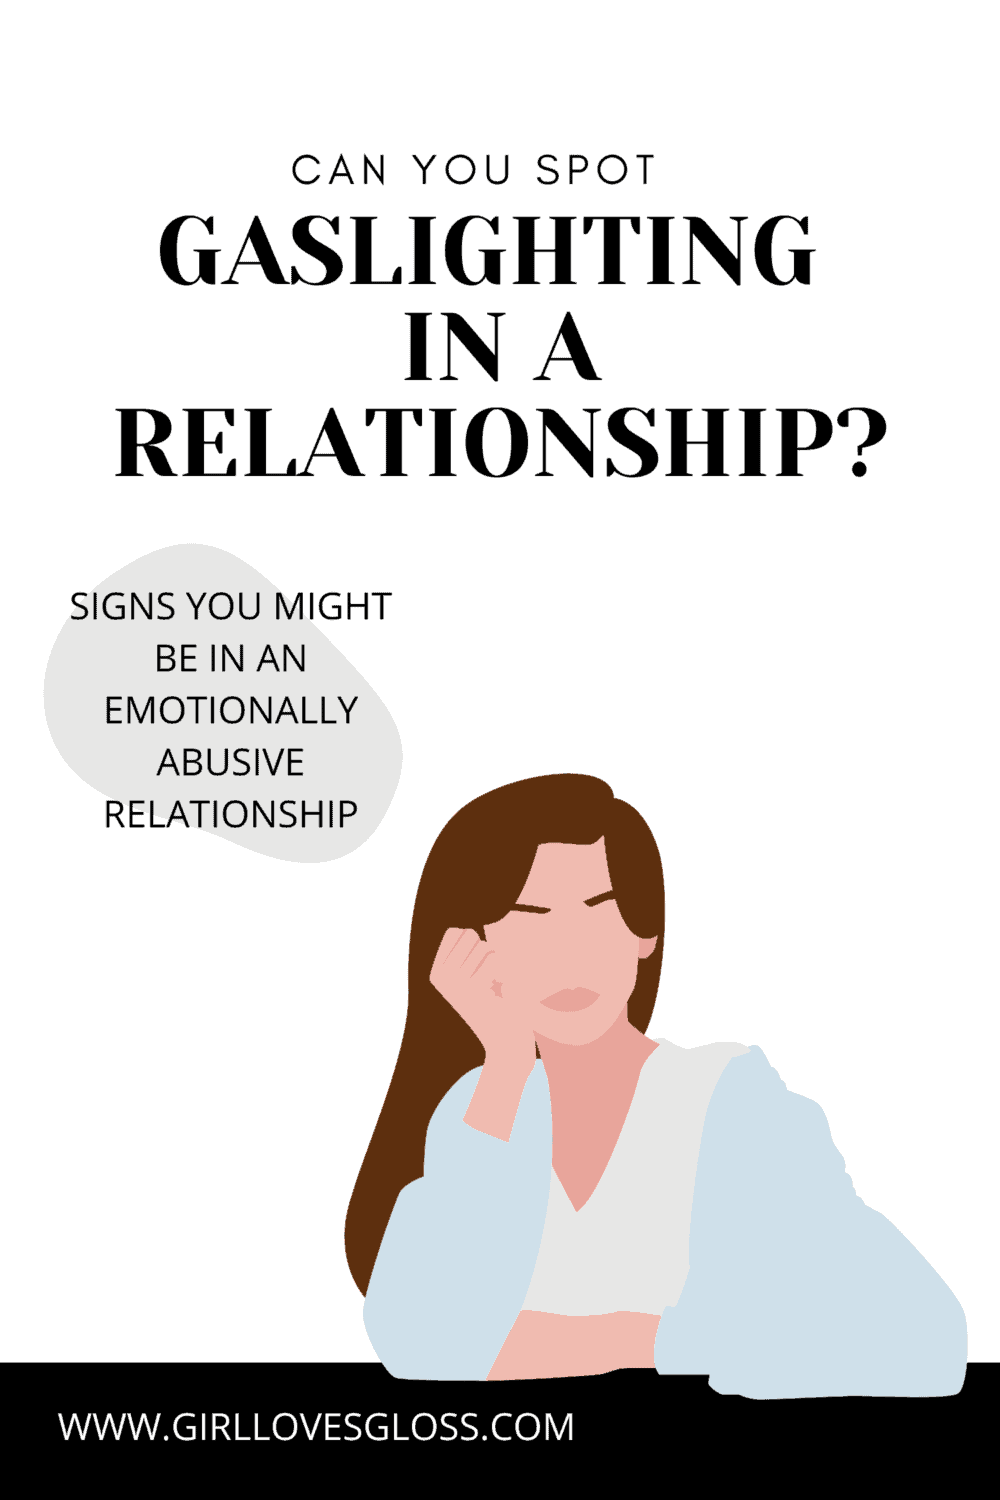 How to spot an emotionally abusive relationship and how to leave a controlling relationship safely